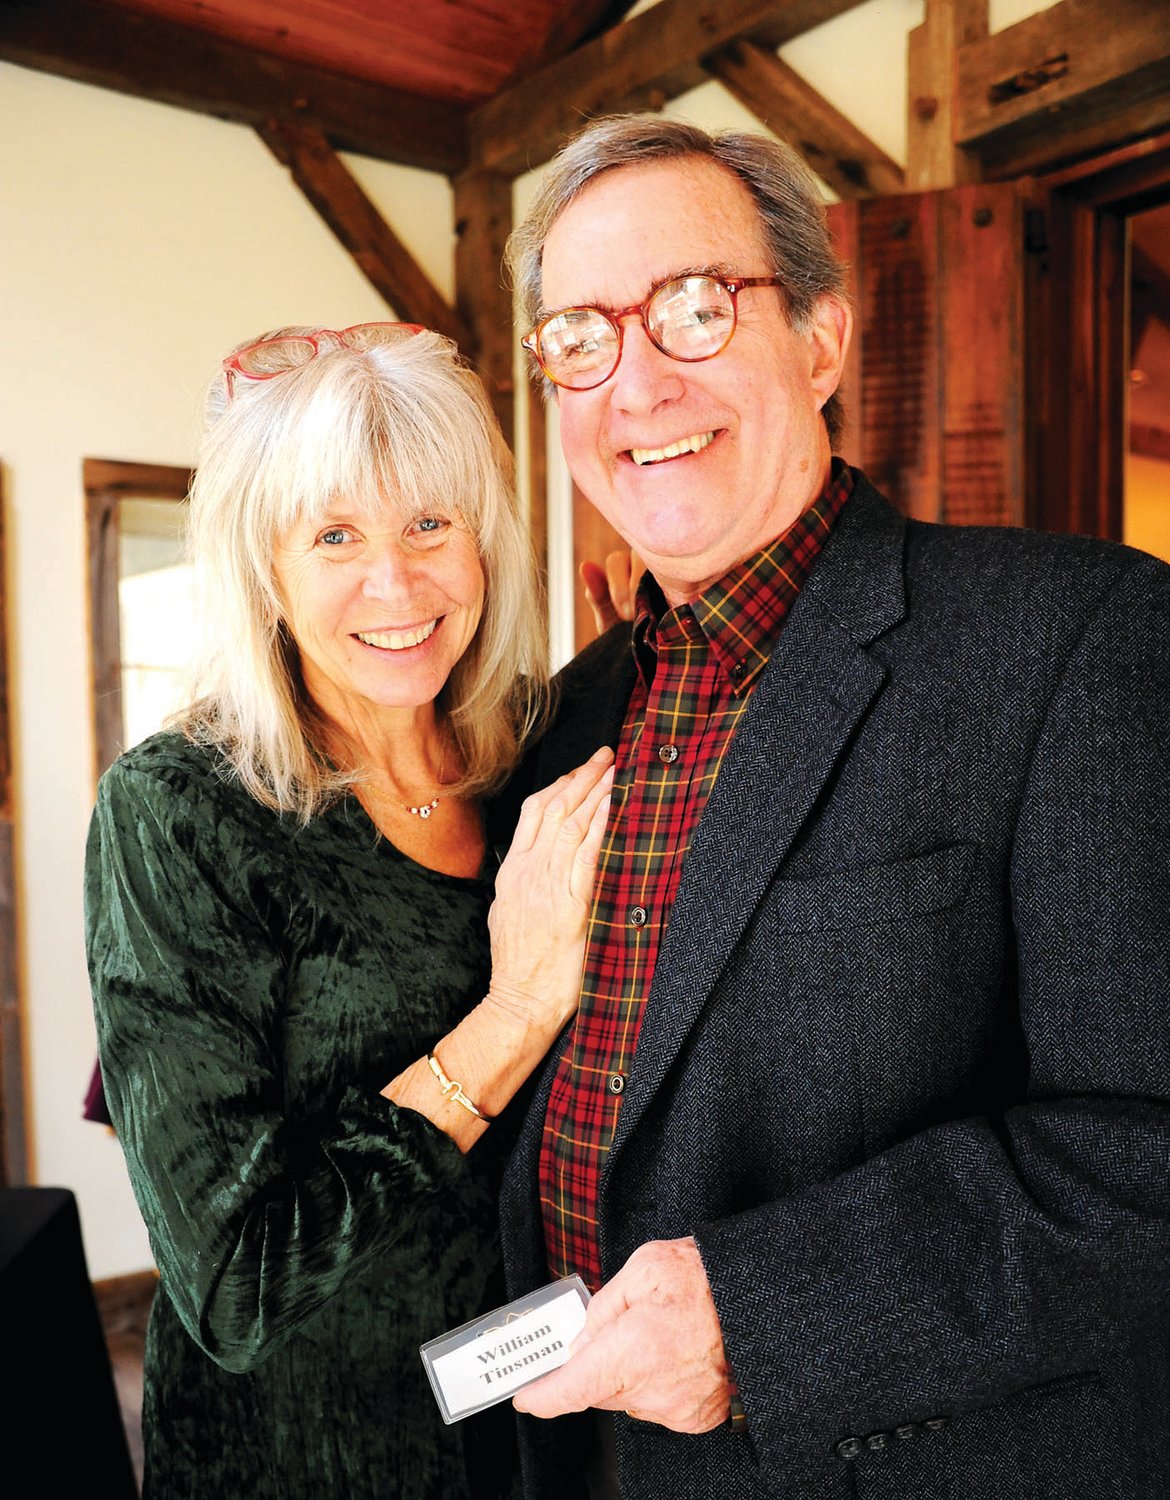 Melody Hunt congratulates her husband, Bill Tinsman, on his being named Solebury Township’s 2019 Distinguished Citizen.